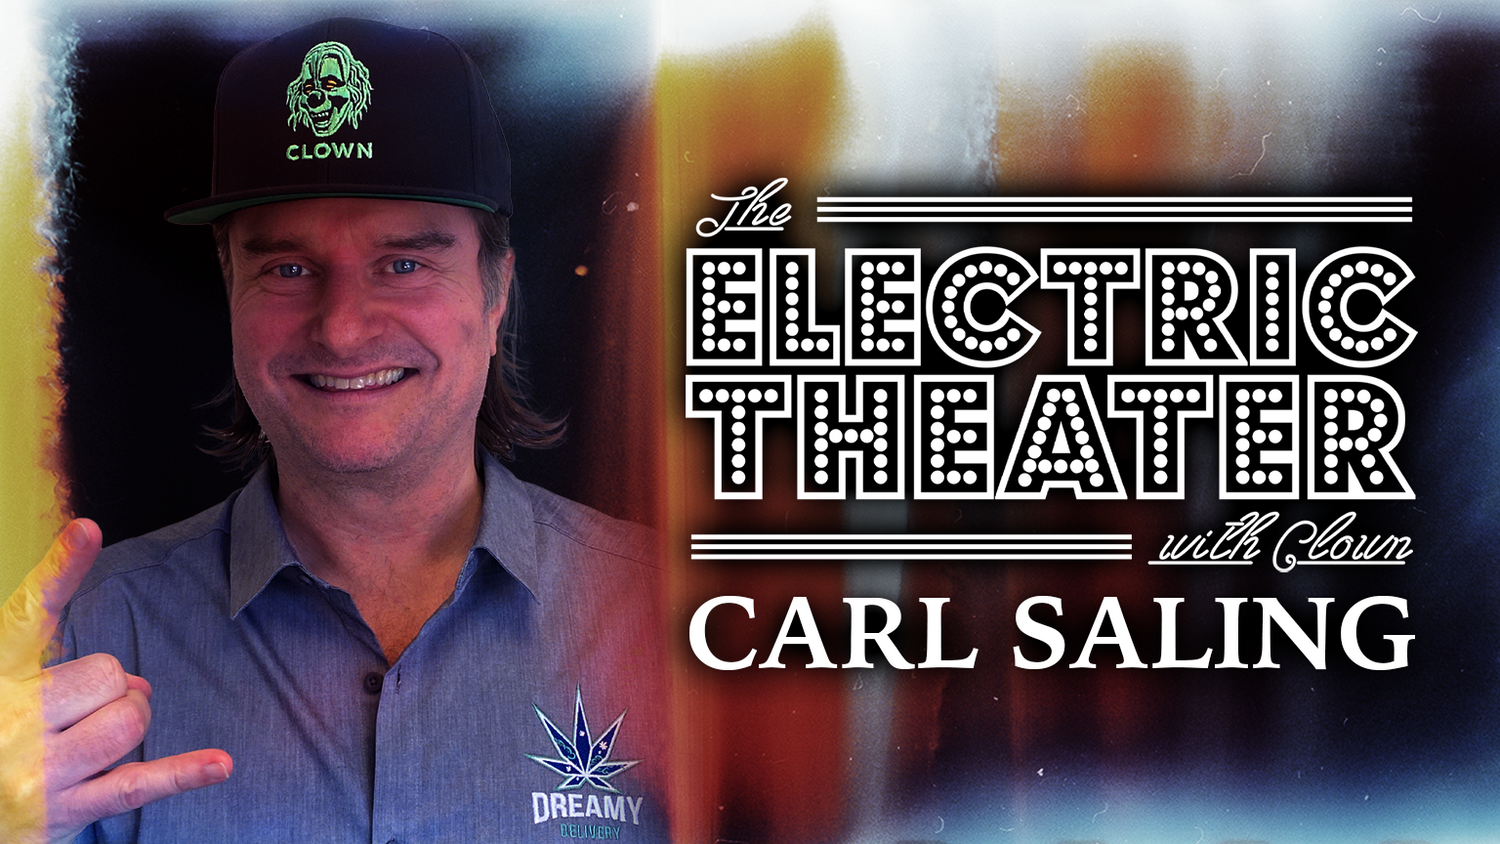 Carl Saling champions the healing power of the flower and details the collaboration in Clown Cannabis on the Electric Theater